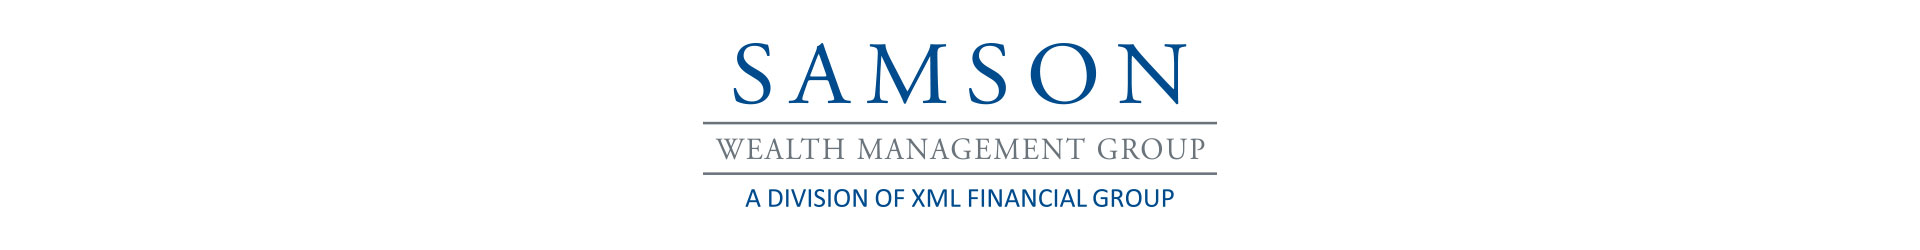 Welcome to Samson Wealth Management Group